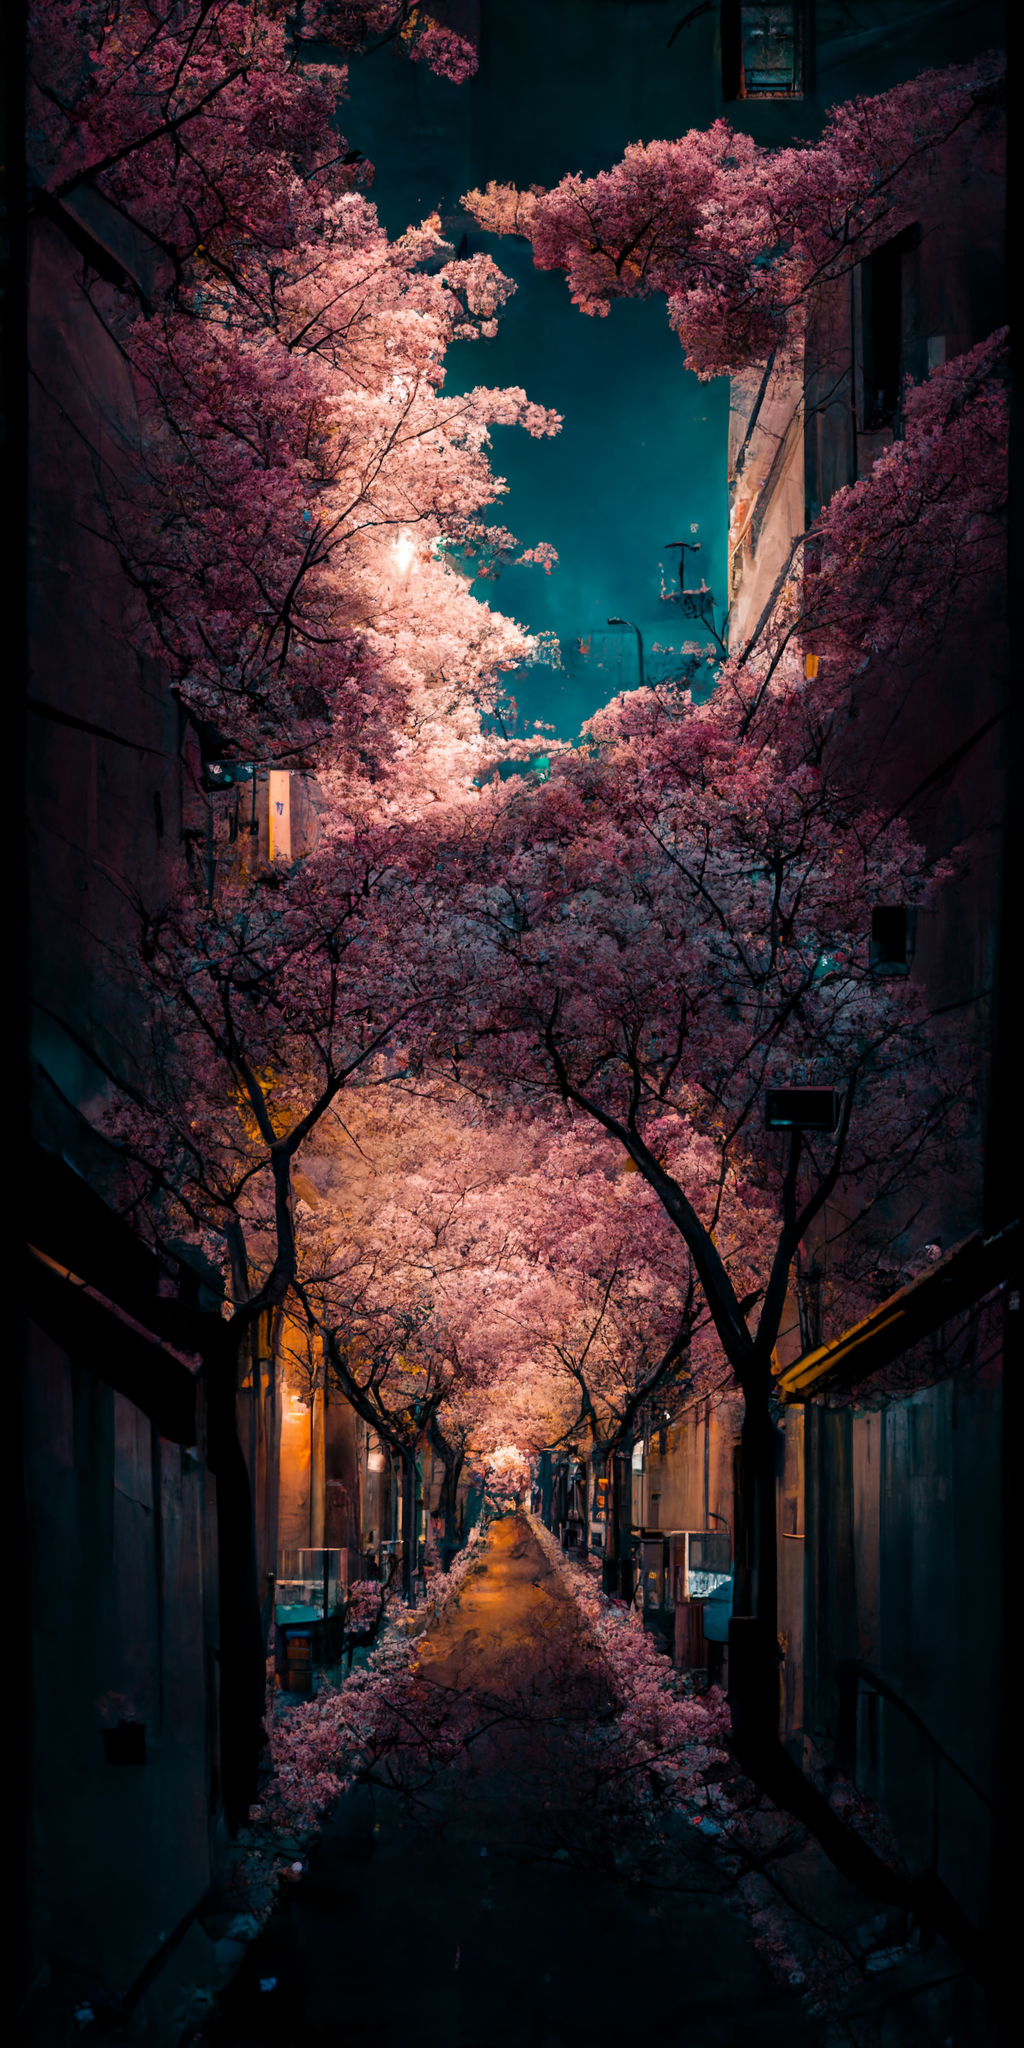 Bluewing_an_alley_in_Tokyo_with_cherry_blossoms_Sony_a7_III_Top_debf7c3c-f8f7-4aca-97c1-33ab4ce33367.jpeg